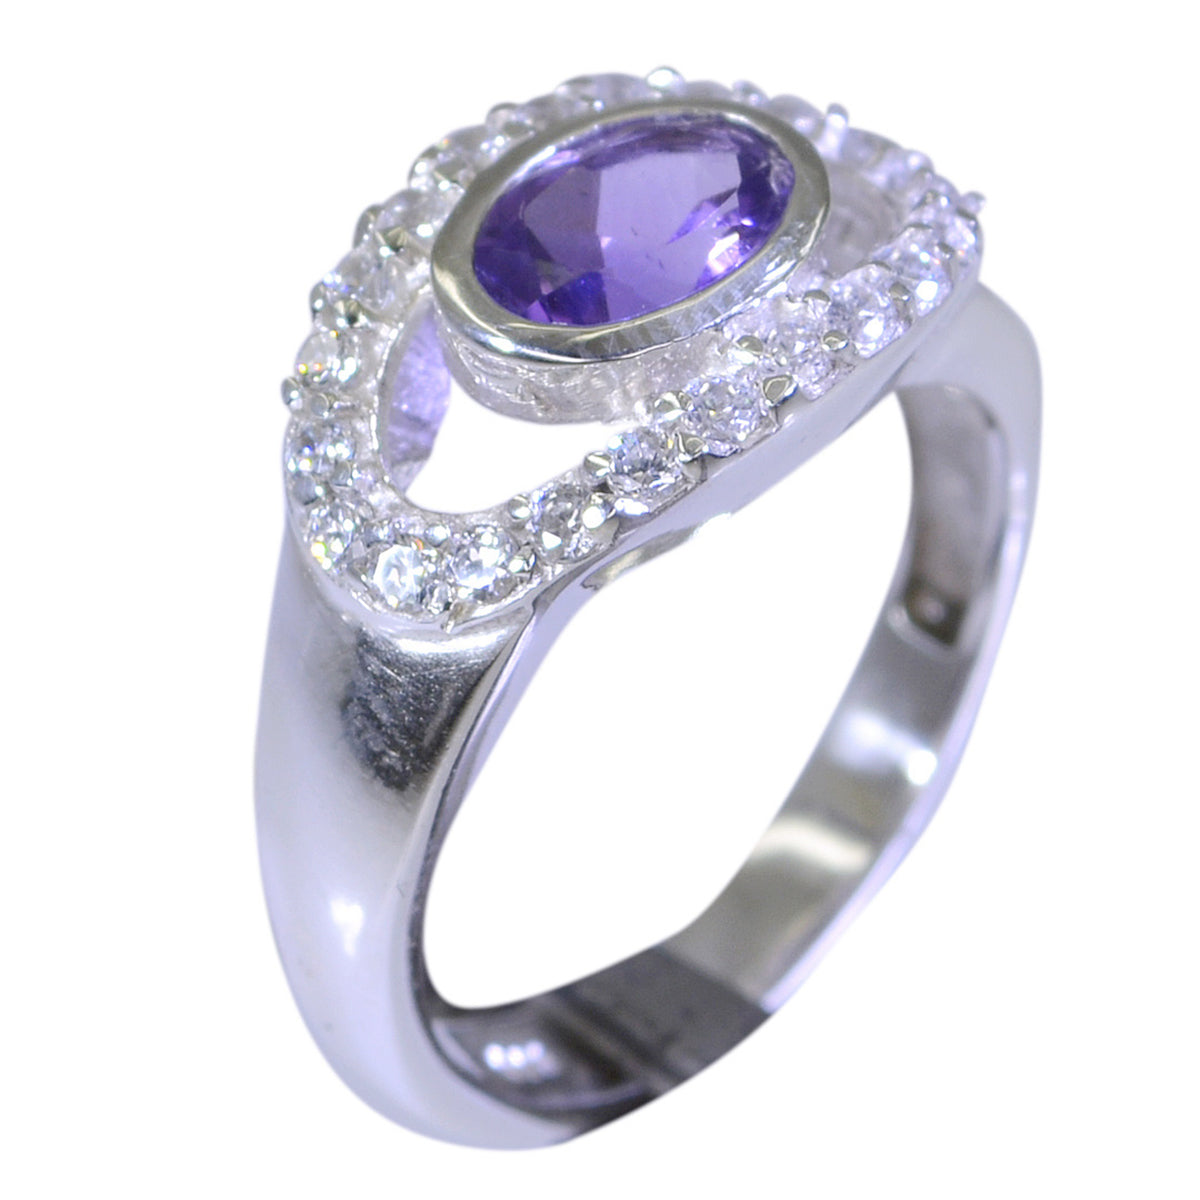 Grand Stone Amethyst Sterling Silver Ring Fast-Fix Jewelry Repair